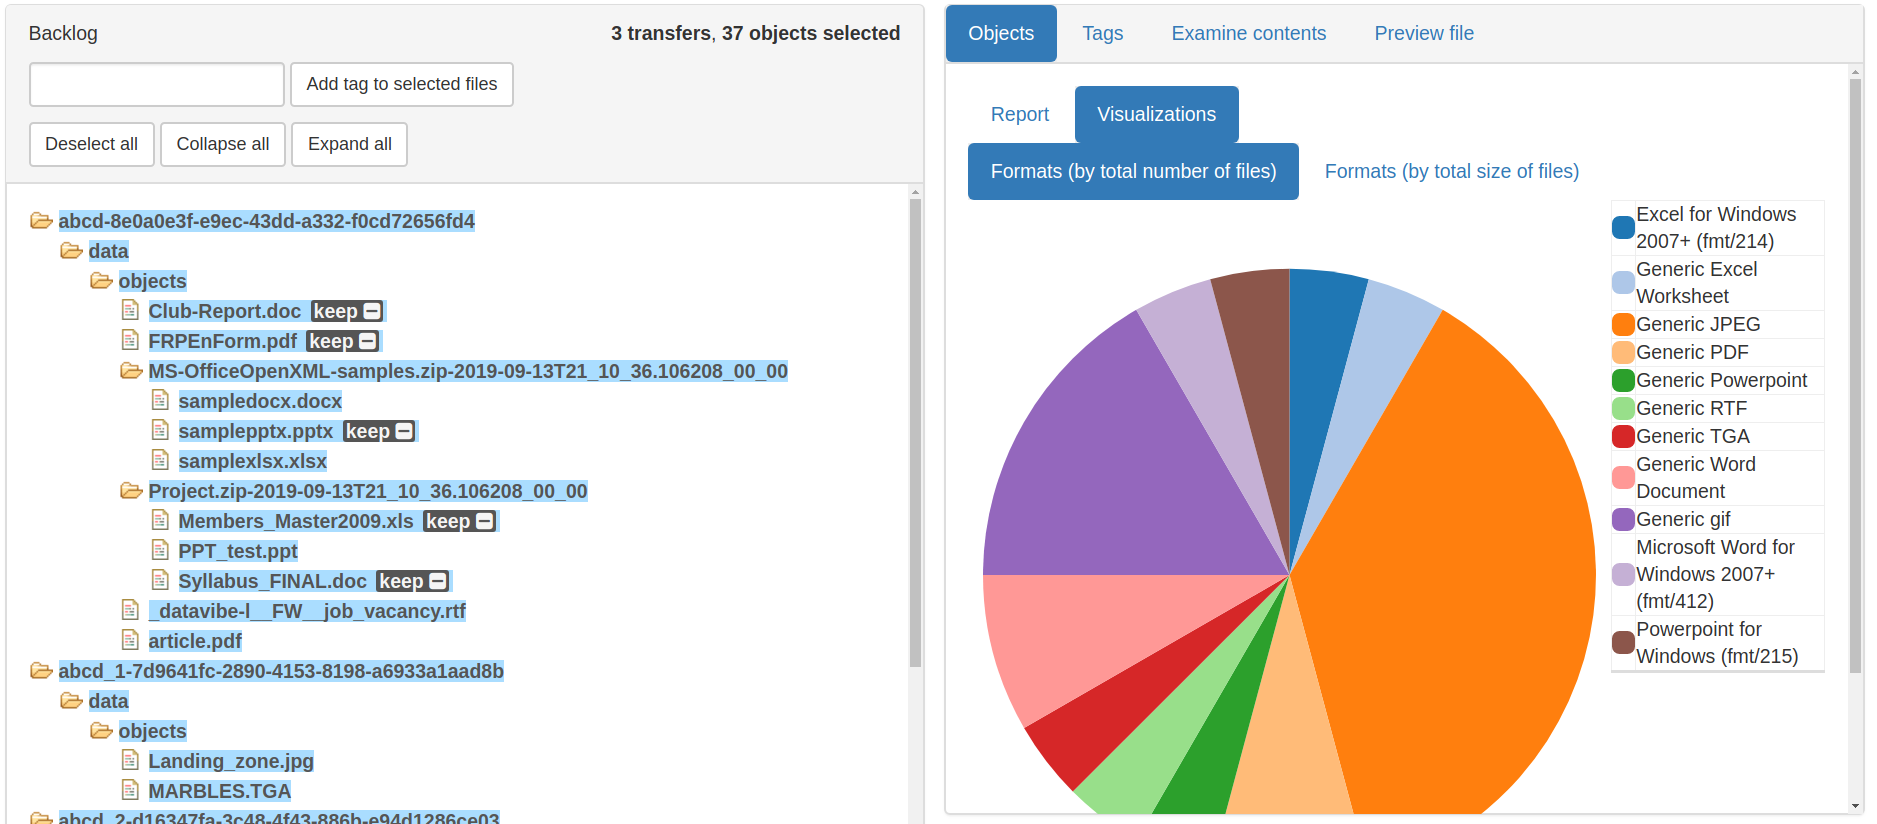 The left-hand side of the image shows the backlog pane with a number of files selected. The right-hand side of the image shows a pie chart depicting the number of files for each format.